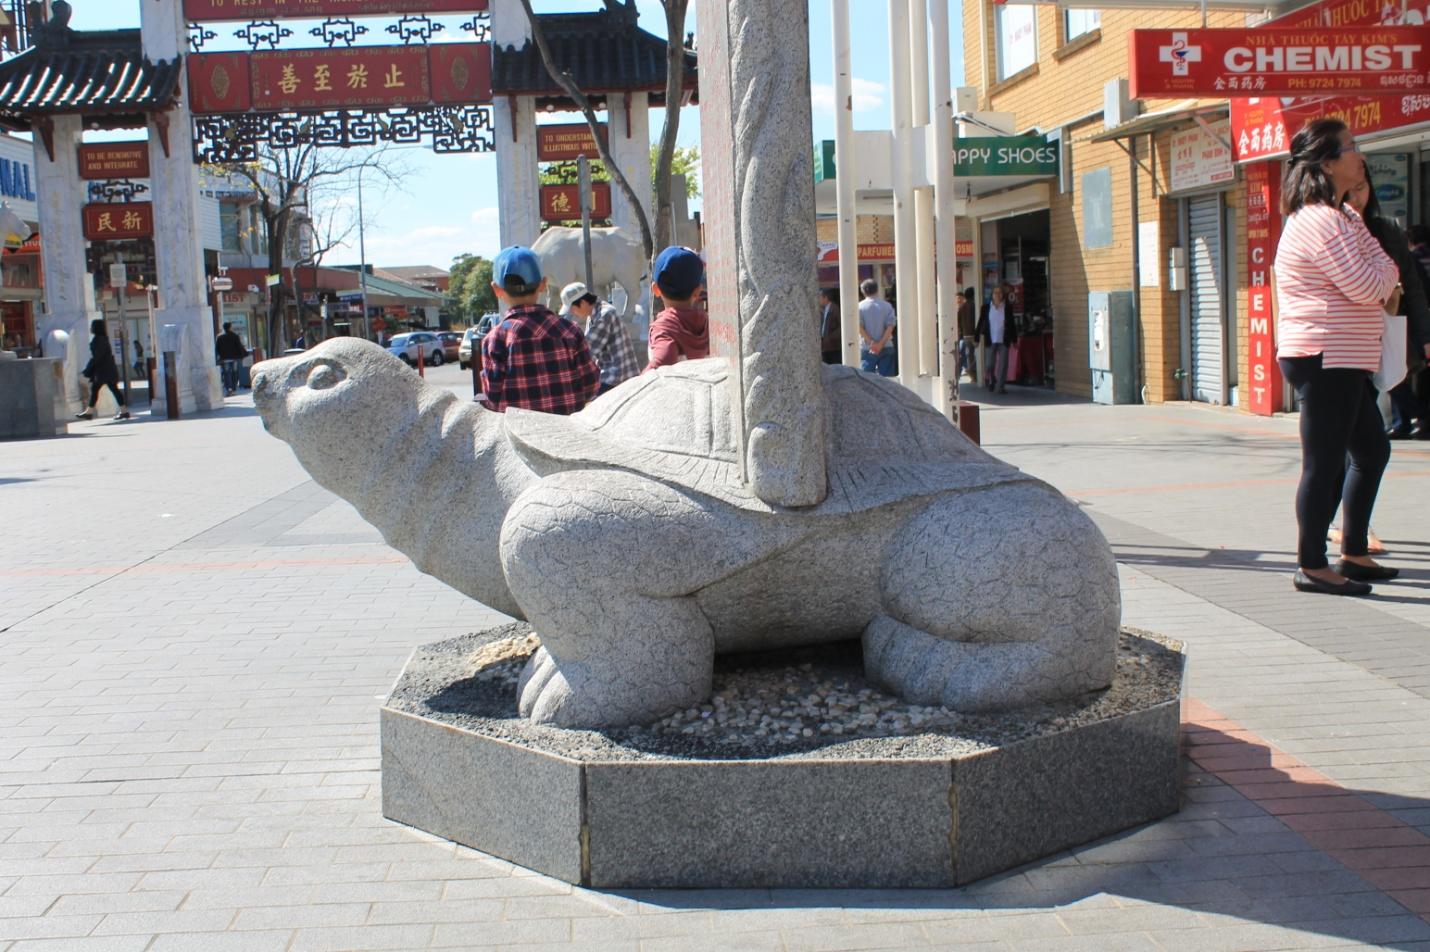 The statue of a turtle in the Vietnam town in Cabramatta (retail district), picture taken on 10.9.14 with a Canon camera